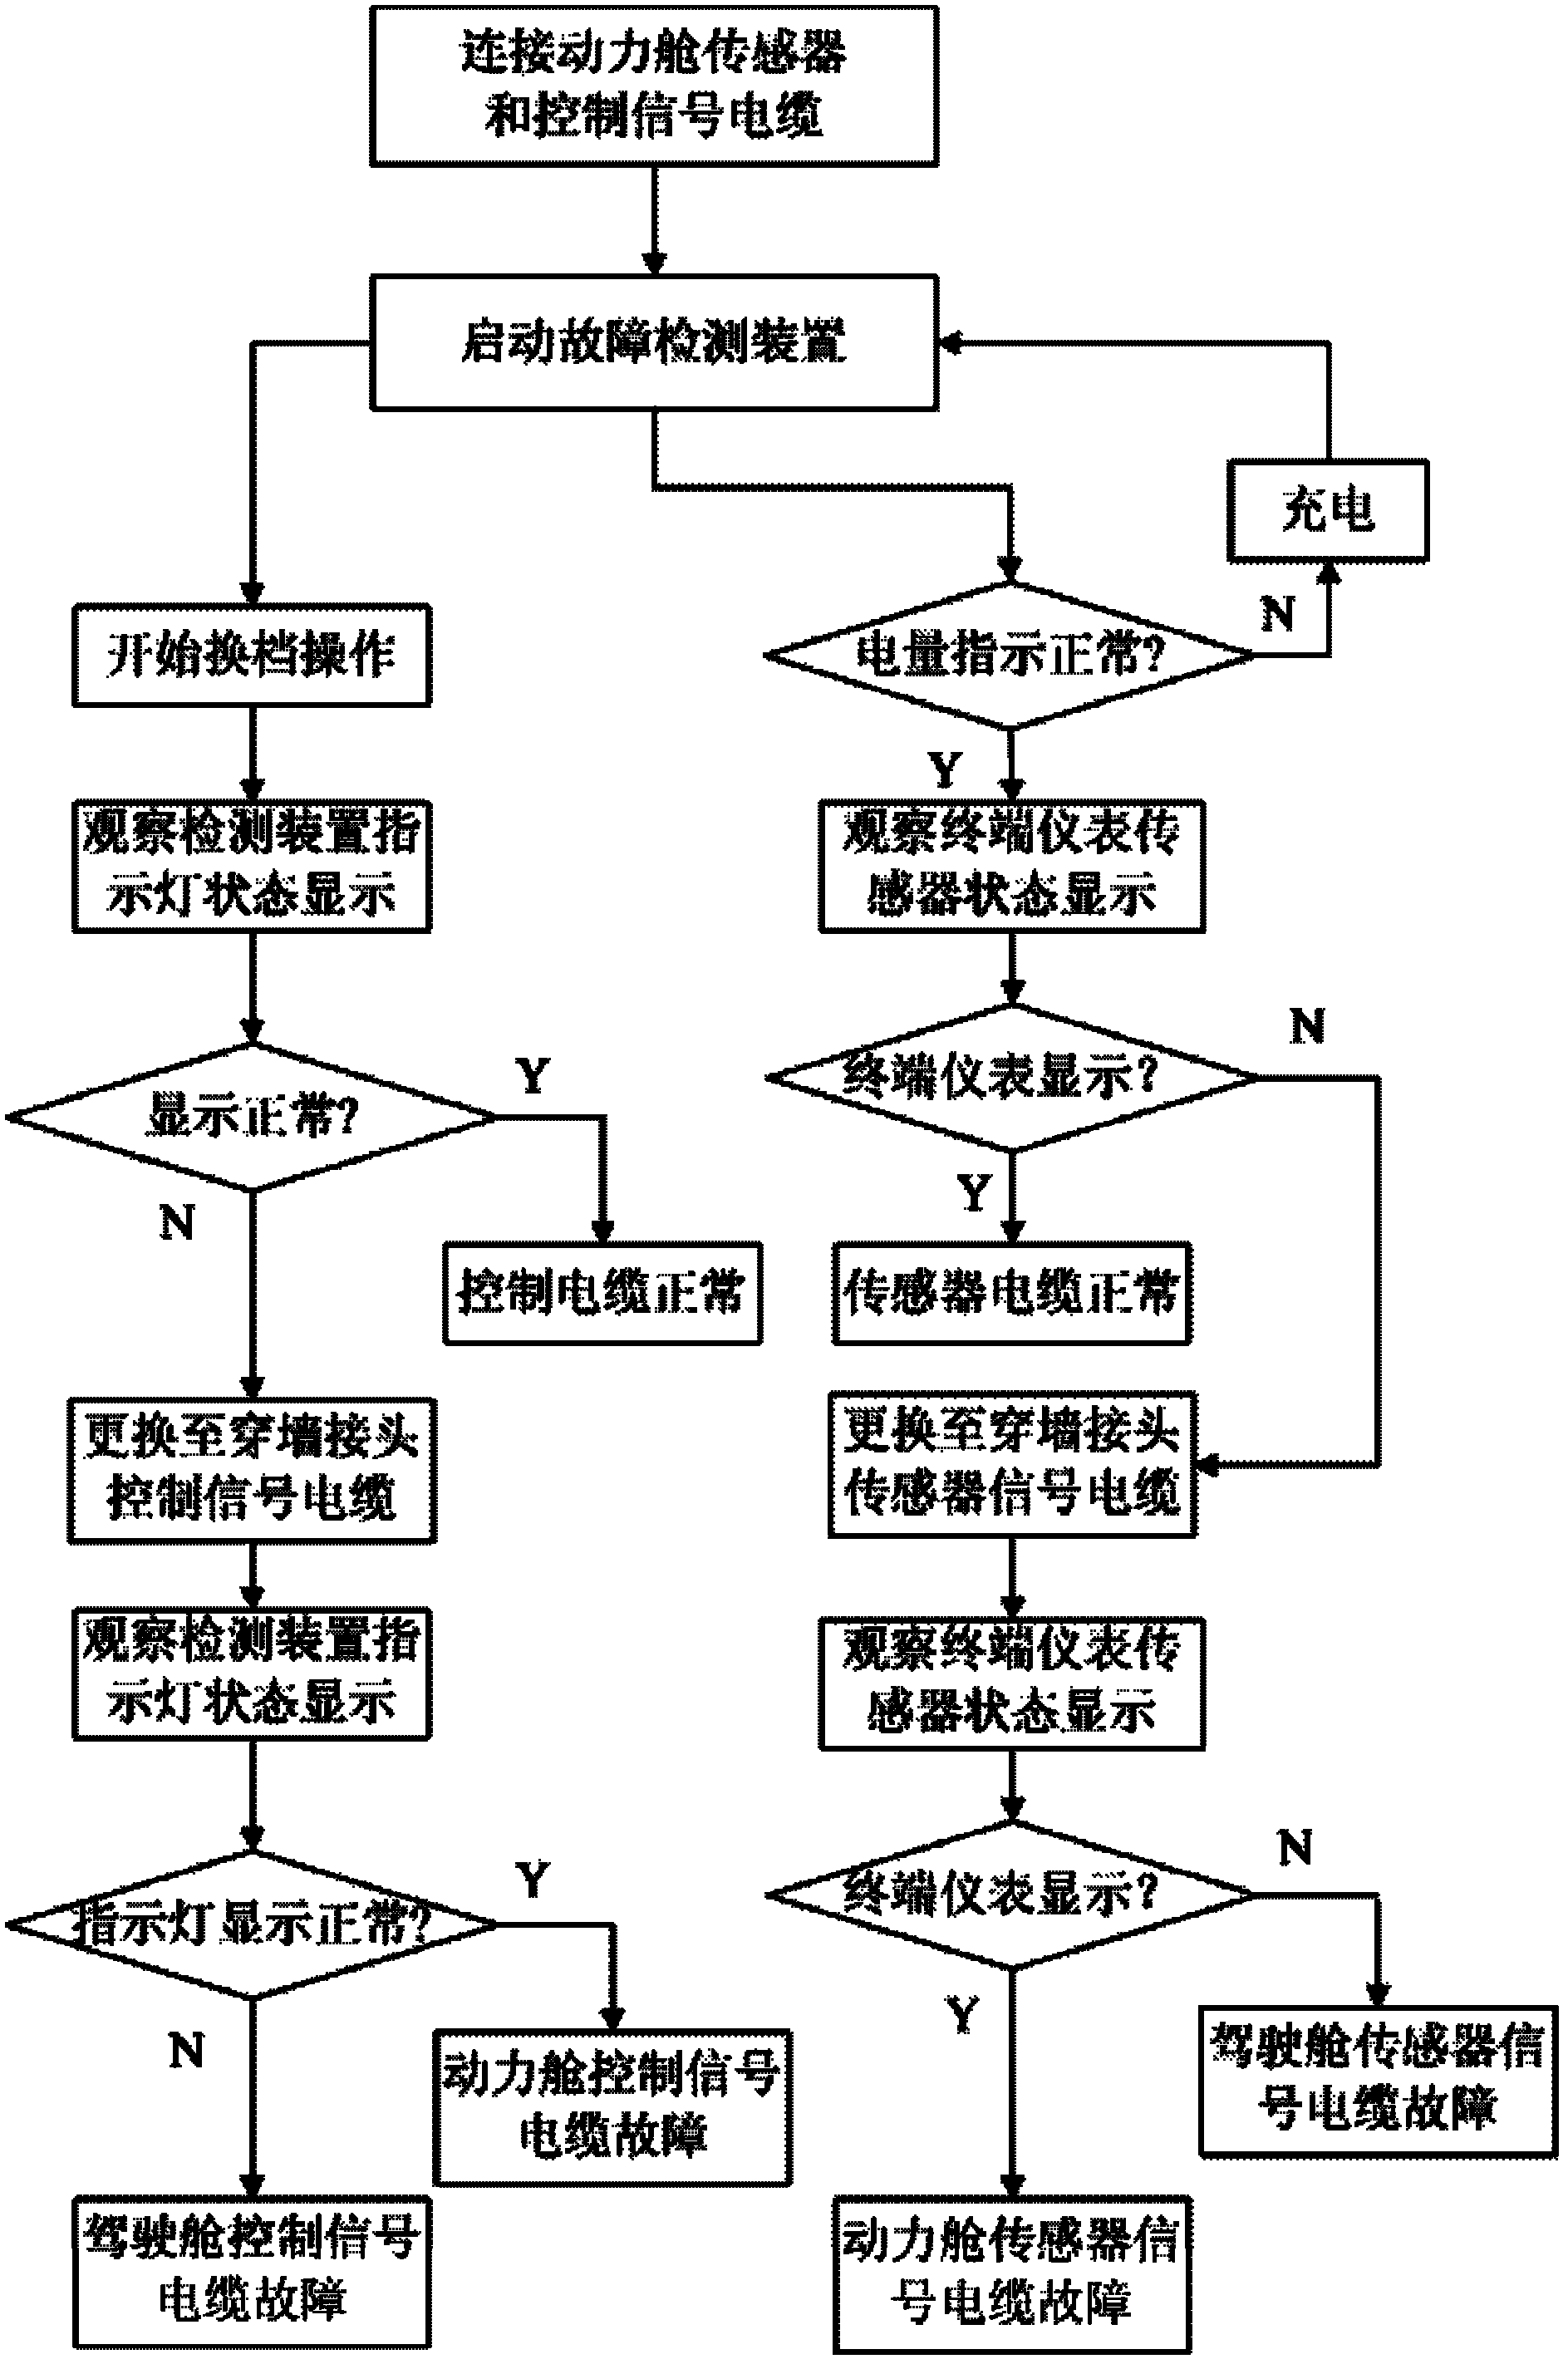 Fault detection system and method for electronic system of engineering vehicle